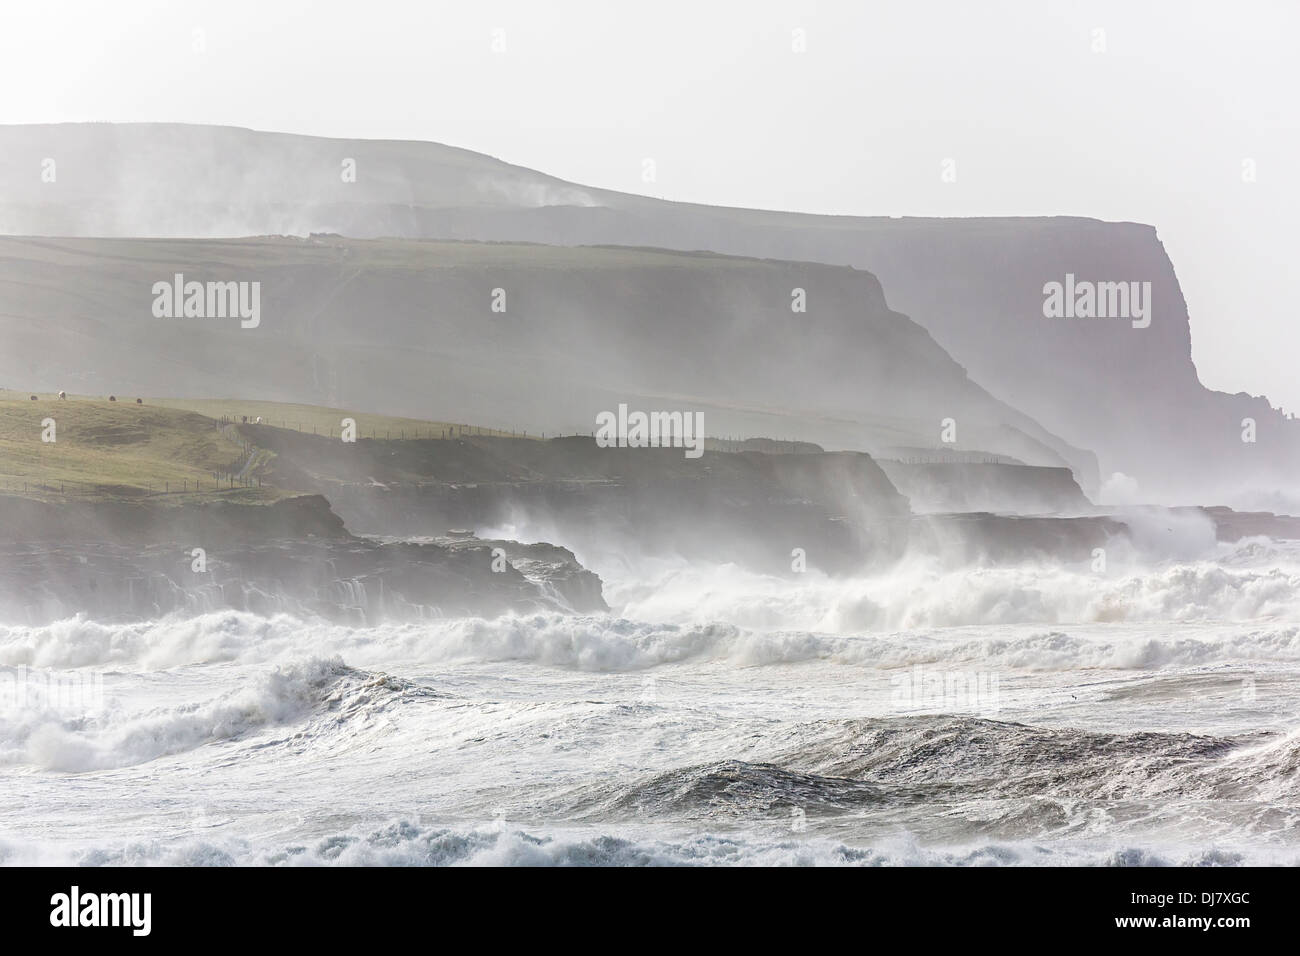 Raue See bei Cliffs of Moher, Doolin, Co. Clare, Irland Stockfoto